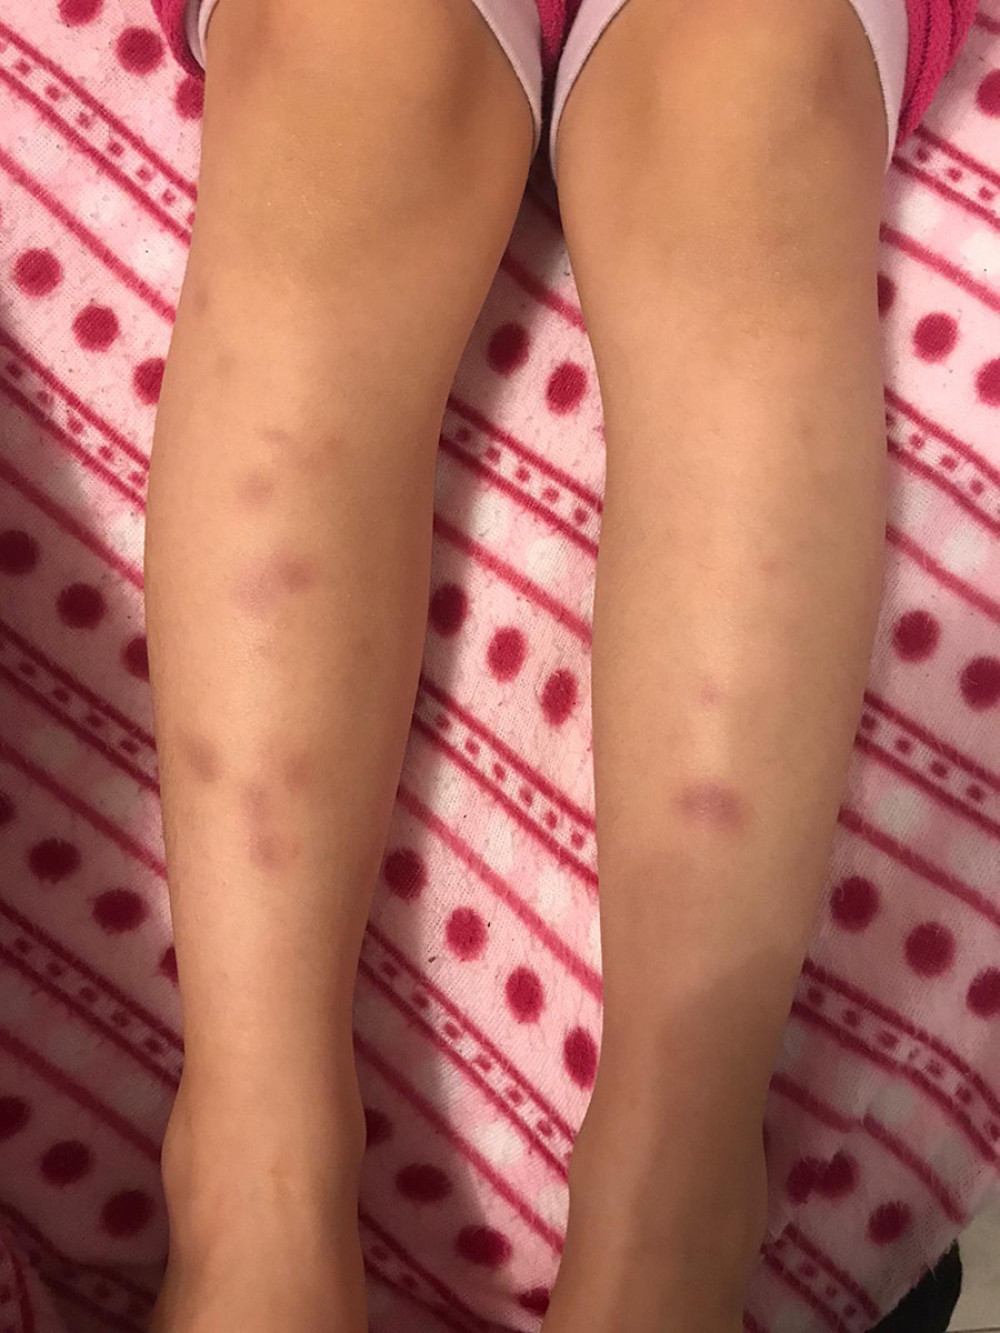 Multiple patchy erythematous lesions spreading on both lower limbs of the patient.